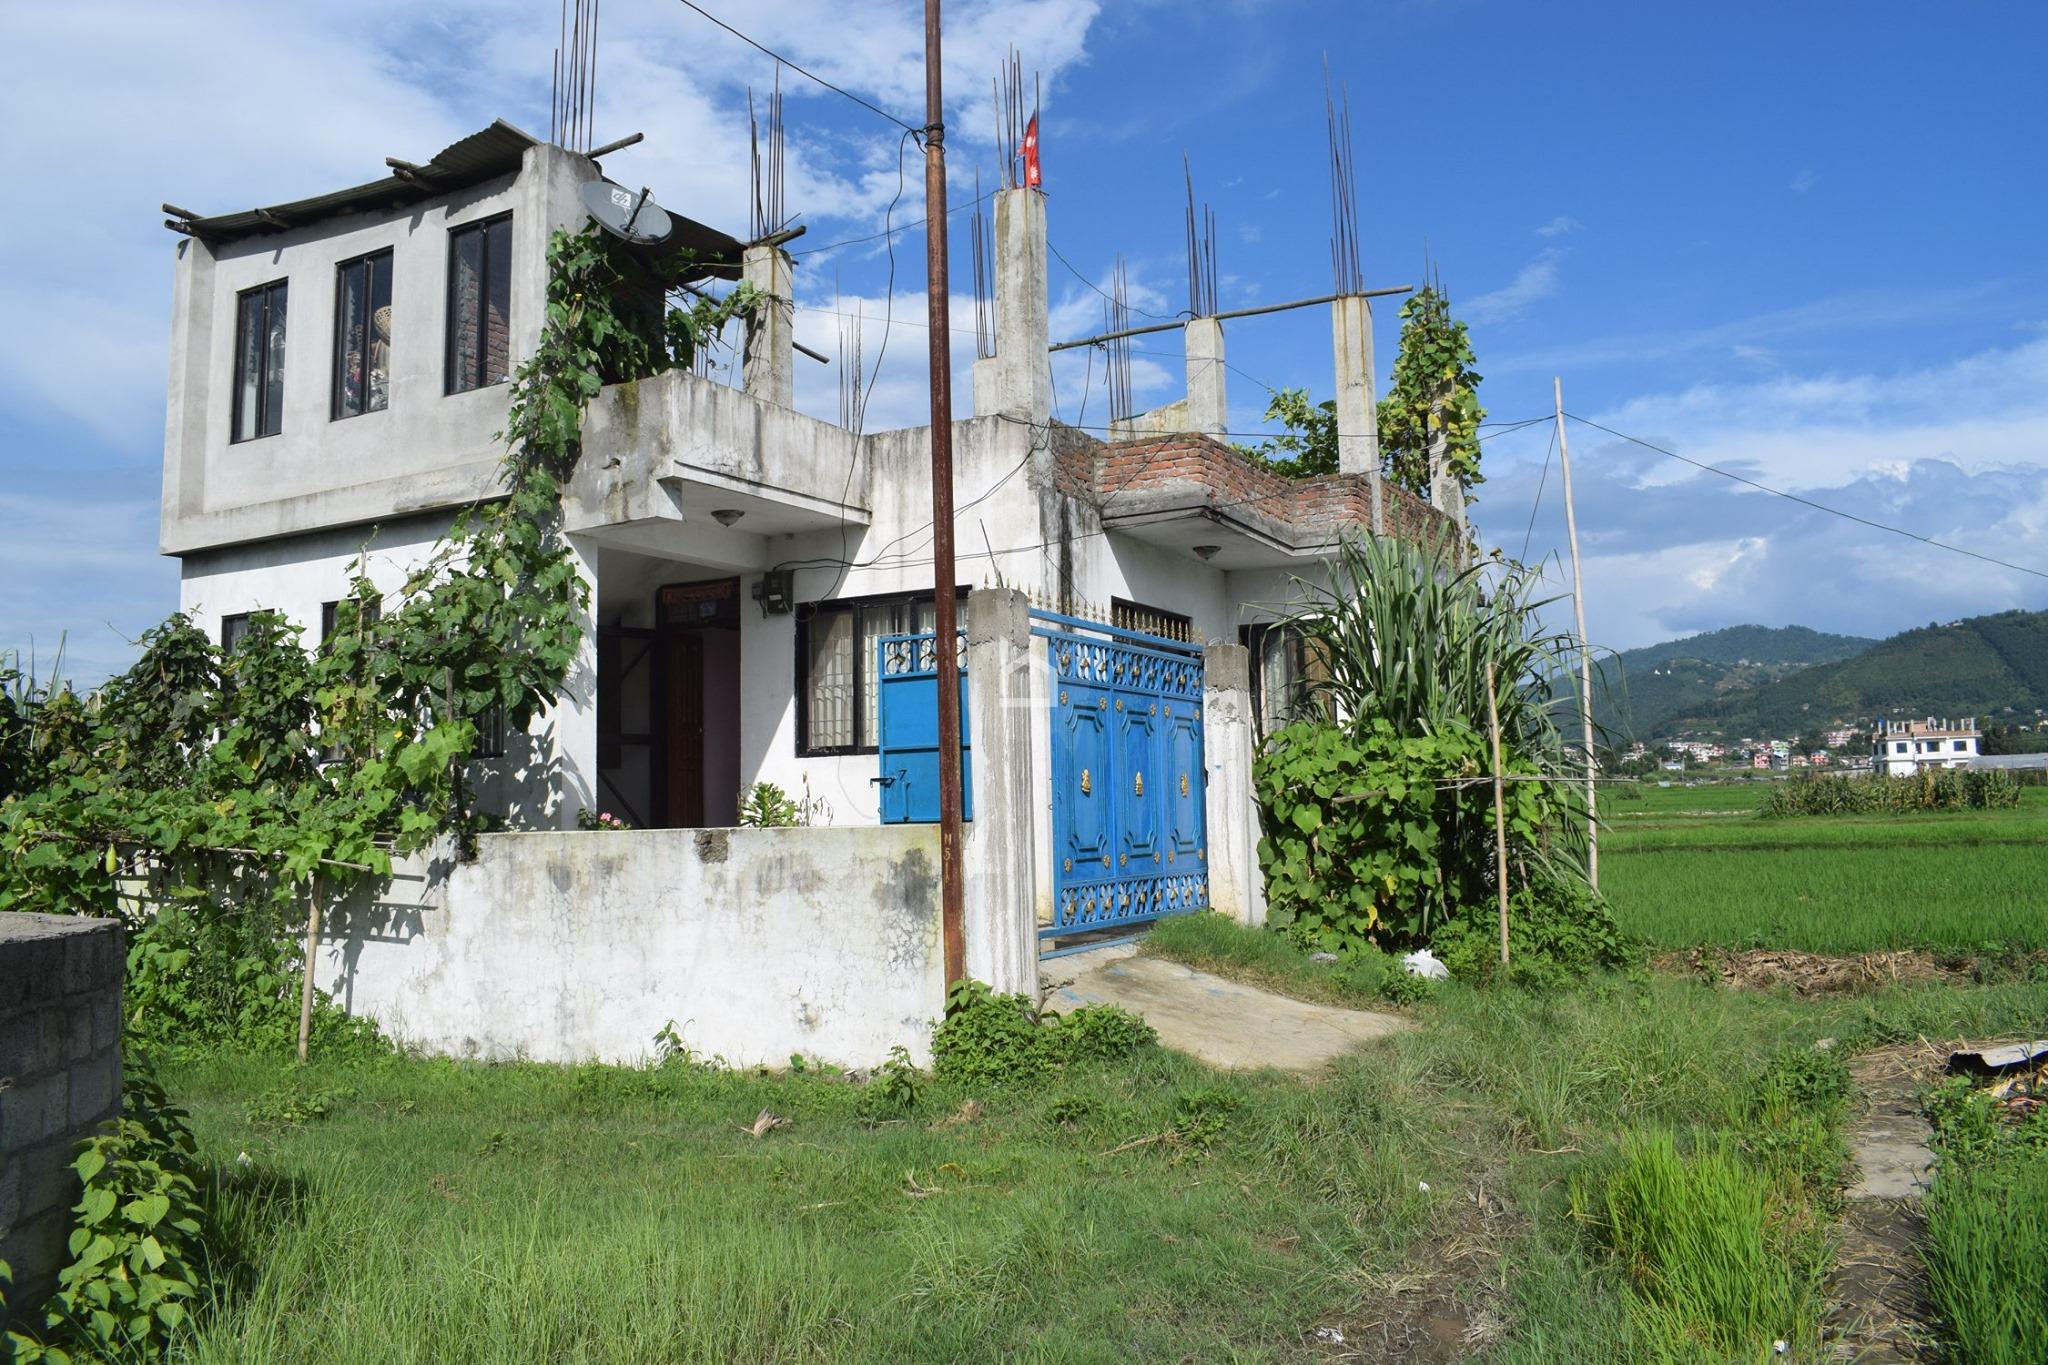 SOLD OUT : House for Sale in Dadikot, Bhaktapur Image 1